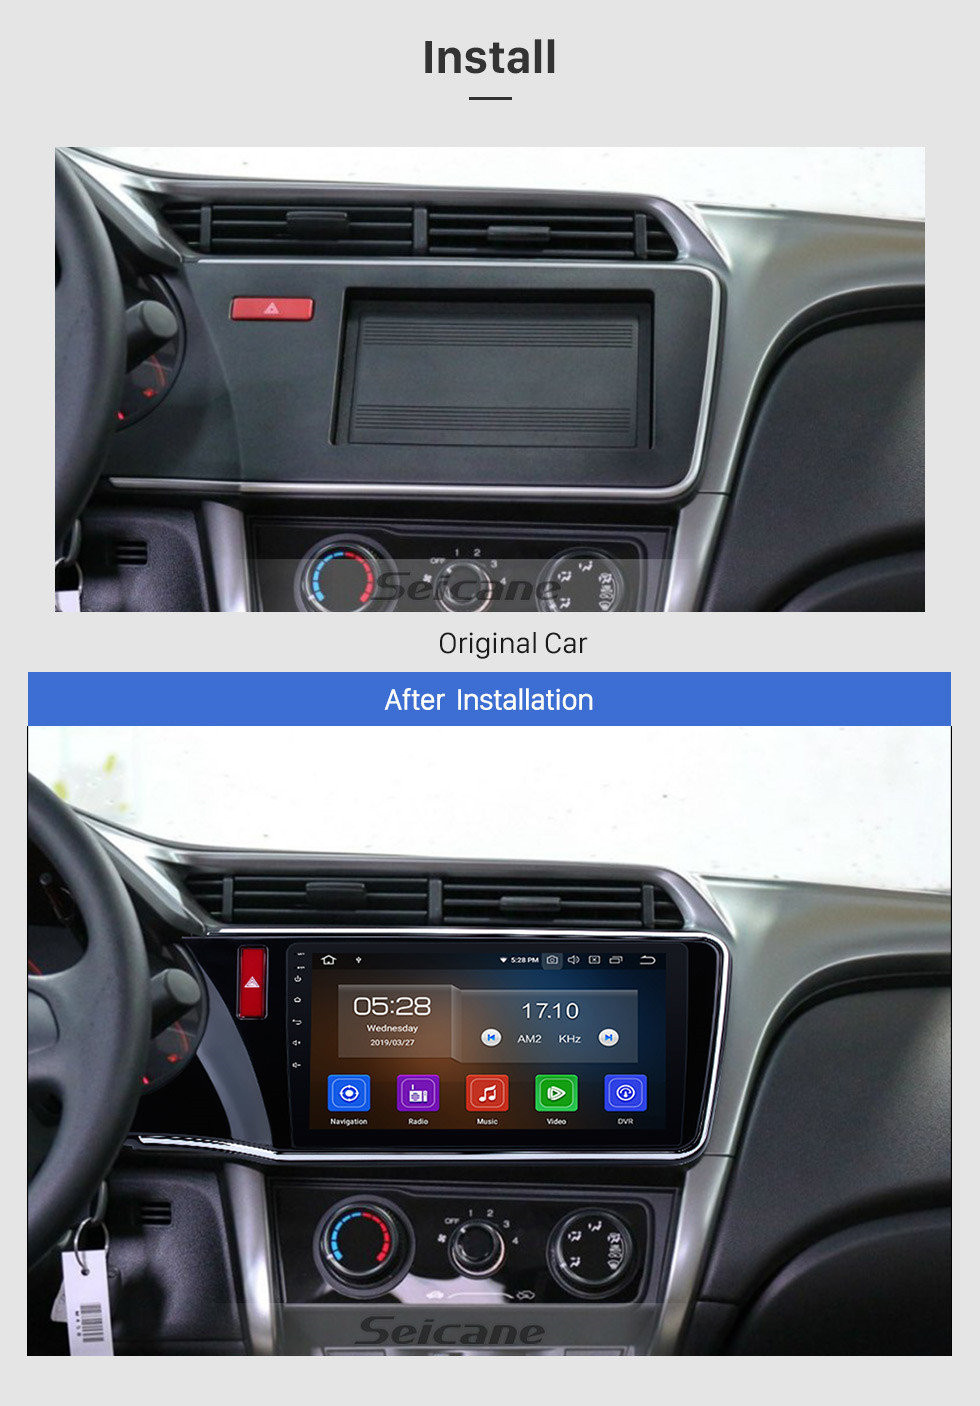 Seicane 10.1 inch Android 11.0 for 2014-2017 Honda City LHD HD Touchscreen Radio GPS Navigation Bluetooth WIFI USB Mirror Link Aux Rearview Camera OBDII TPMS 1080P video